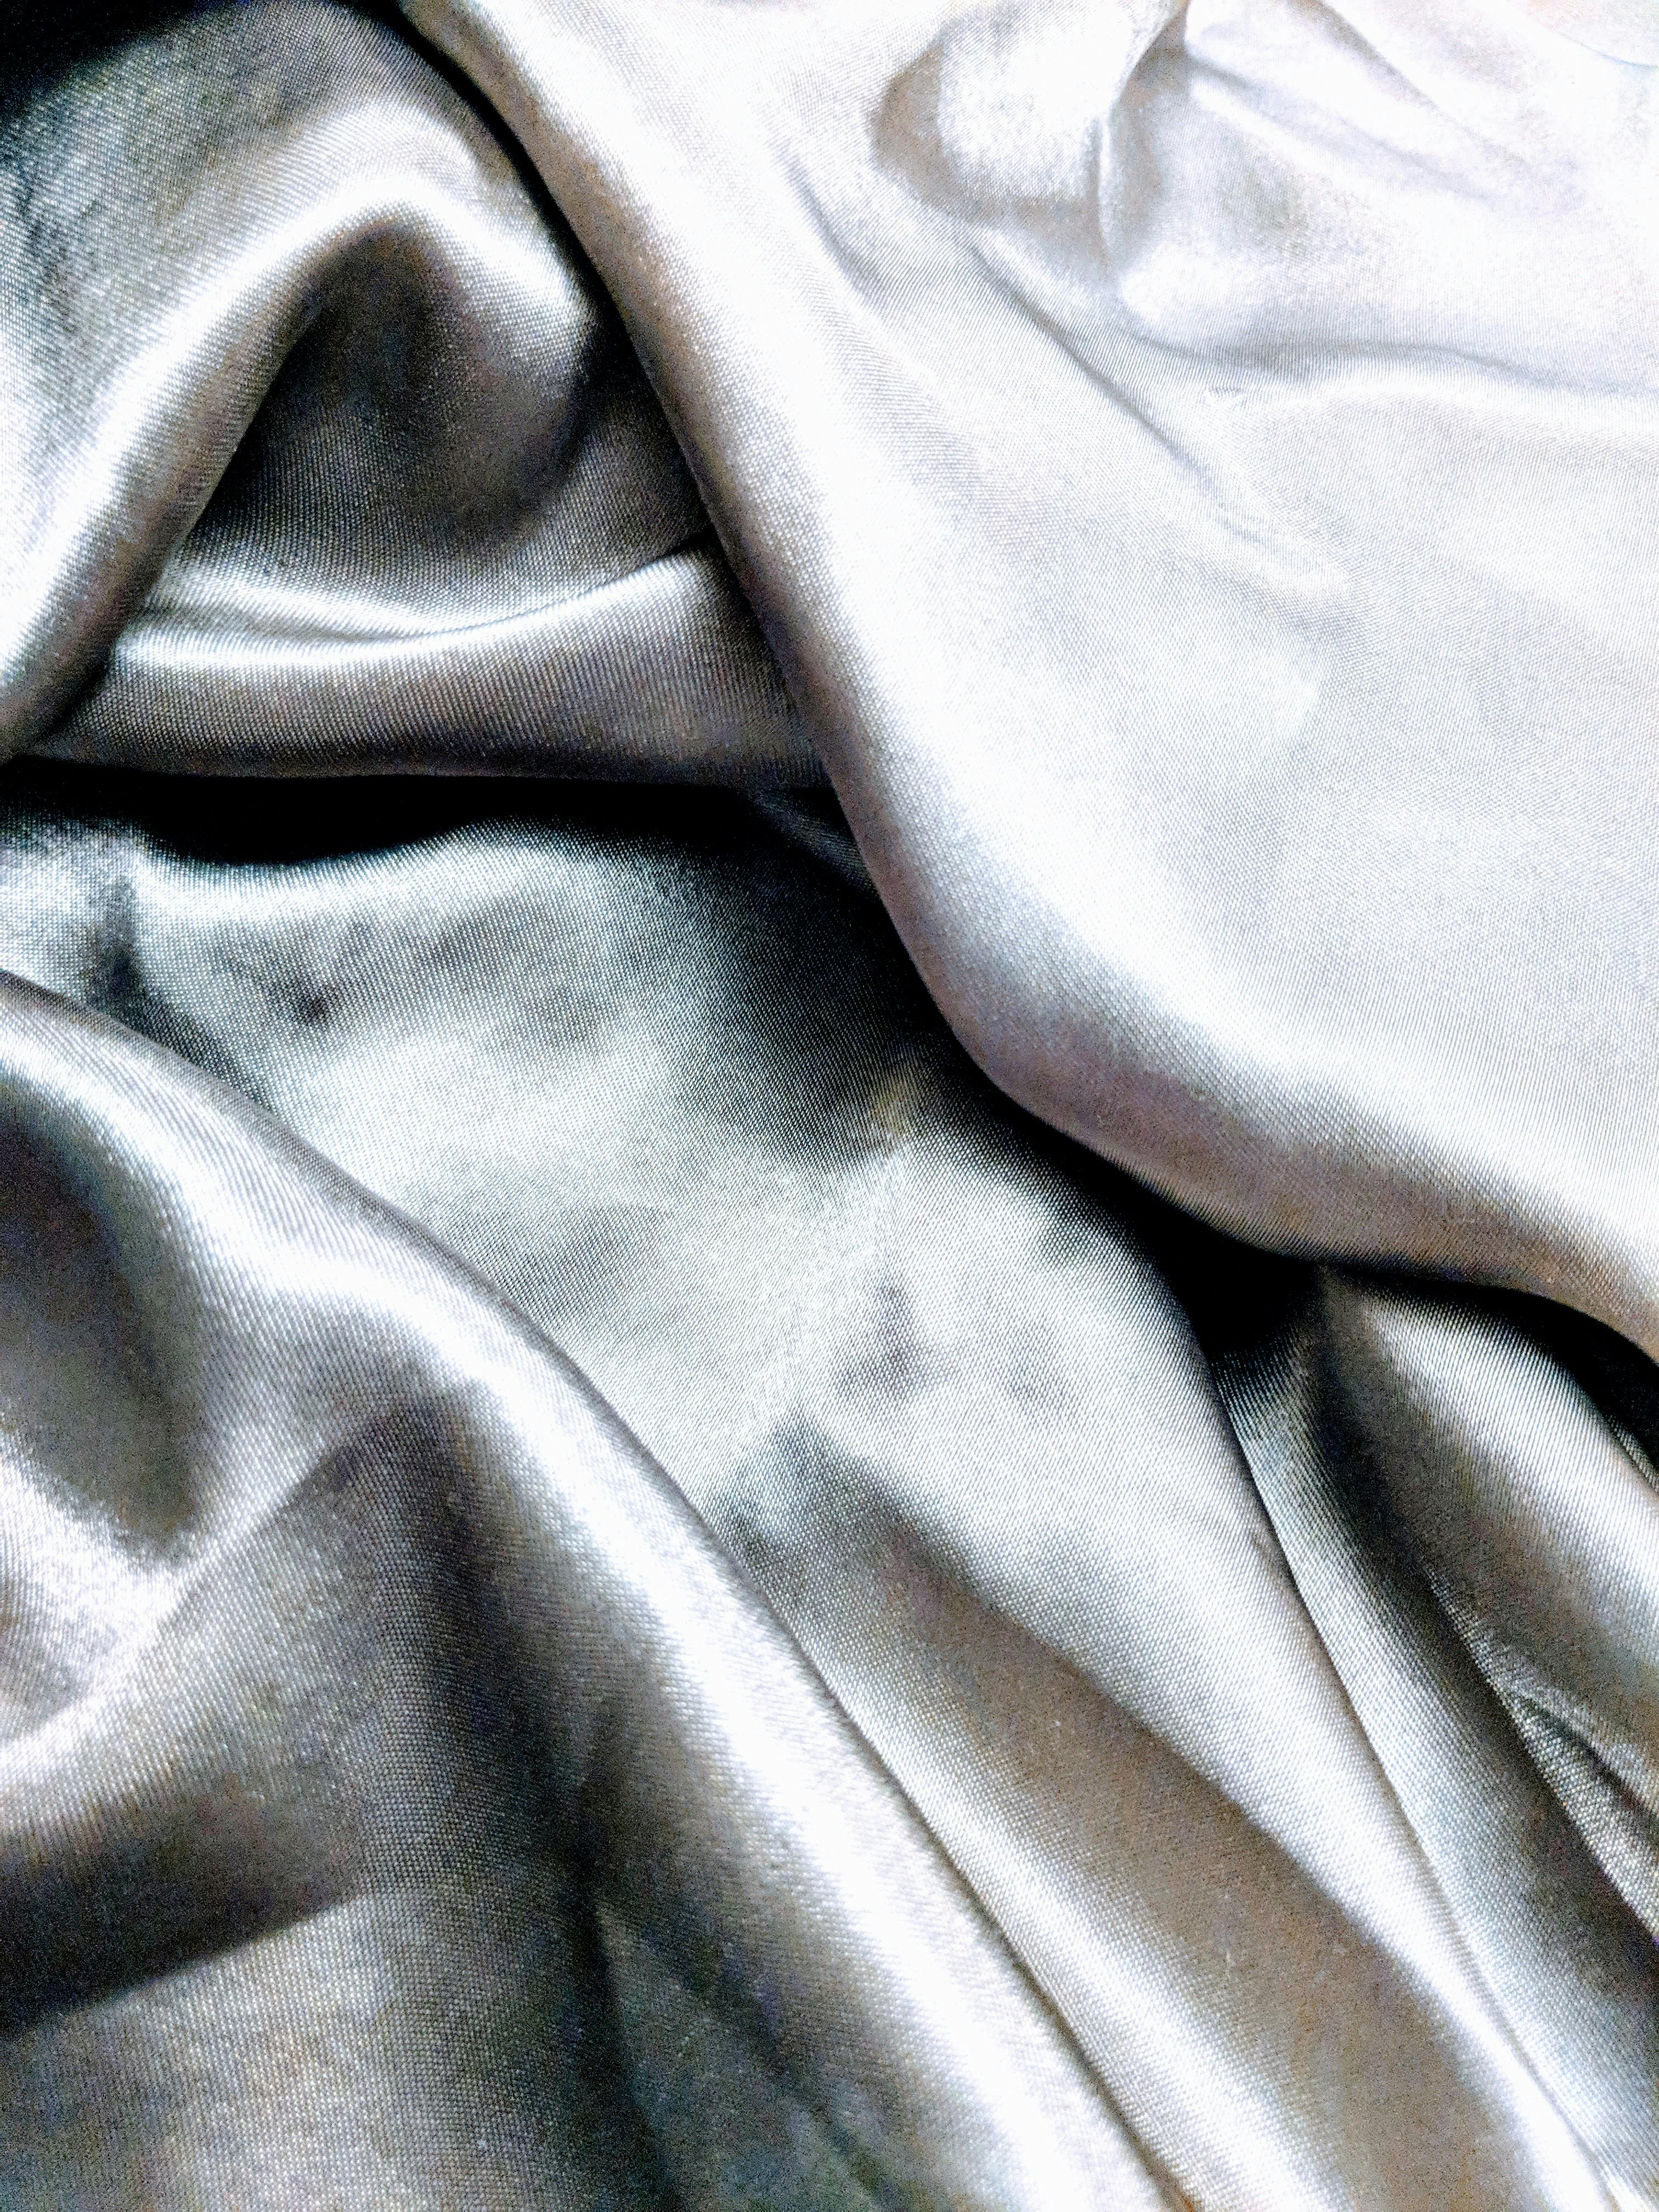 Free stock photo of grascale, satin sheets